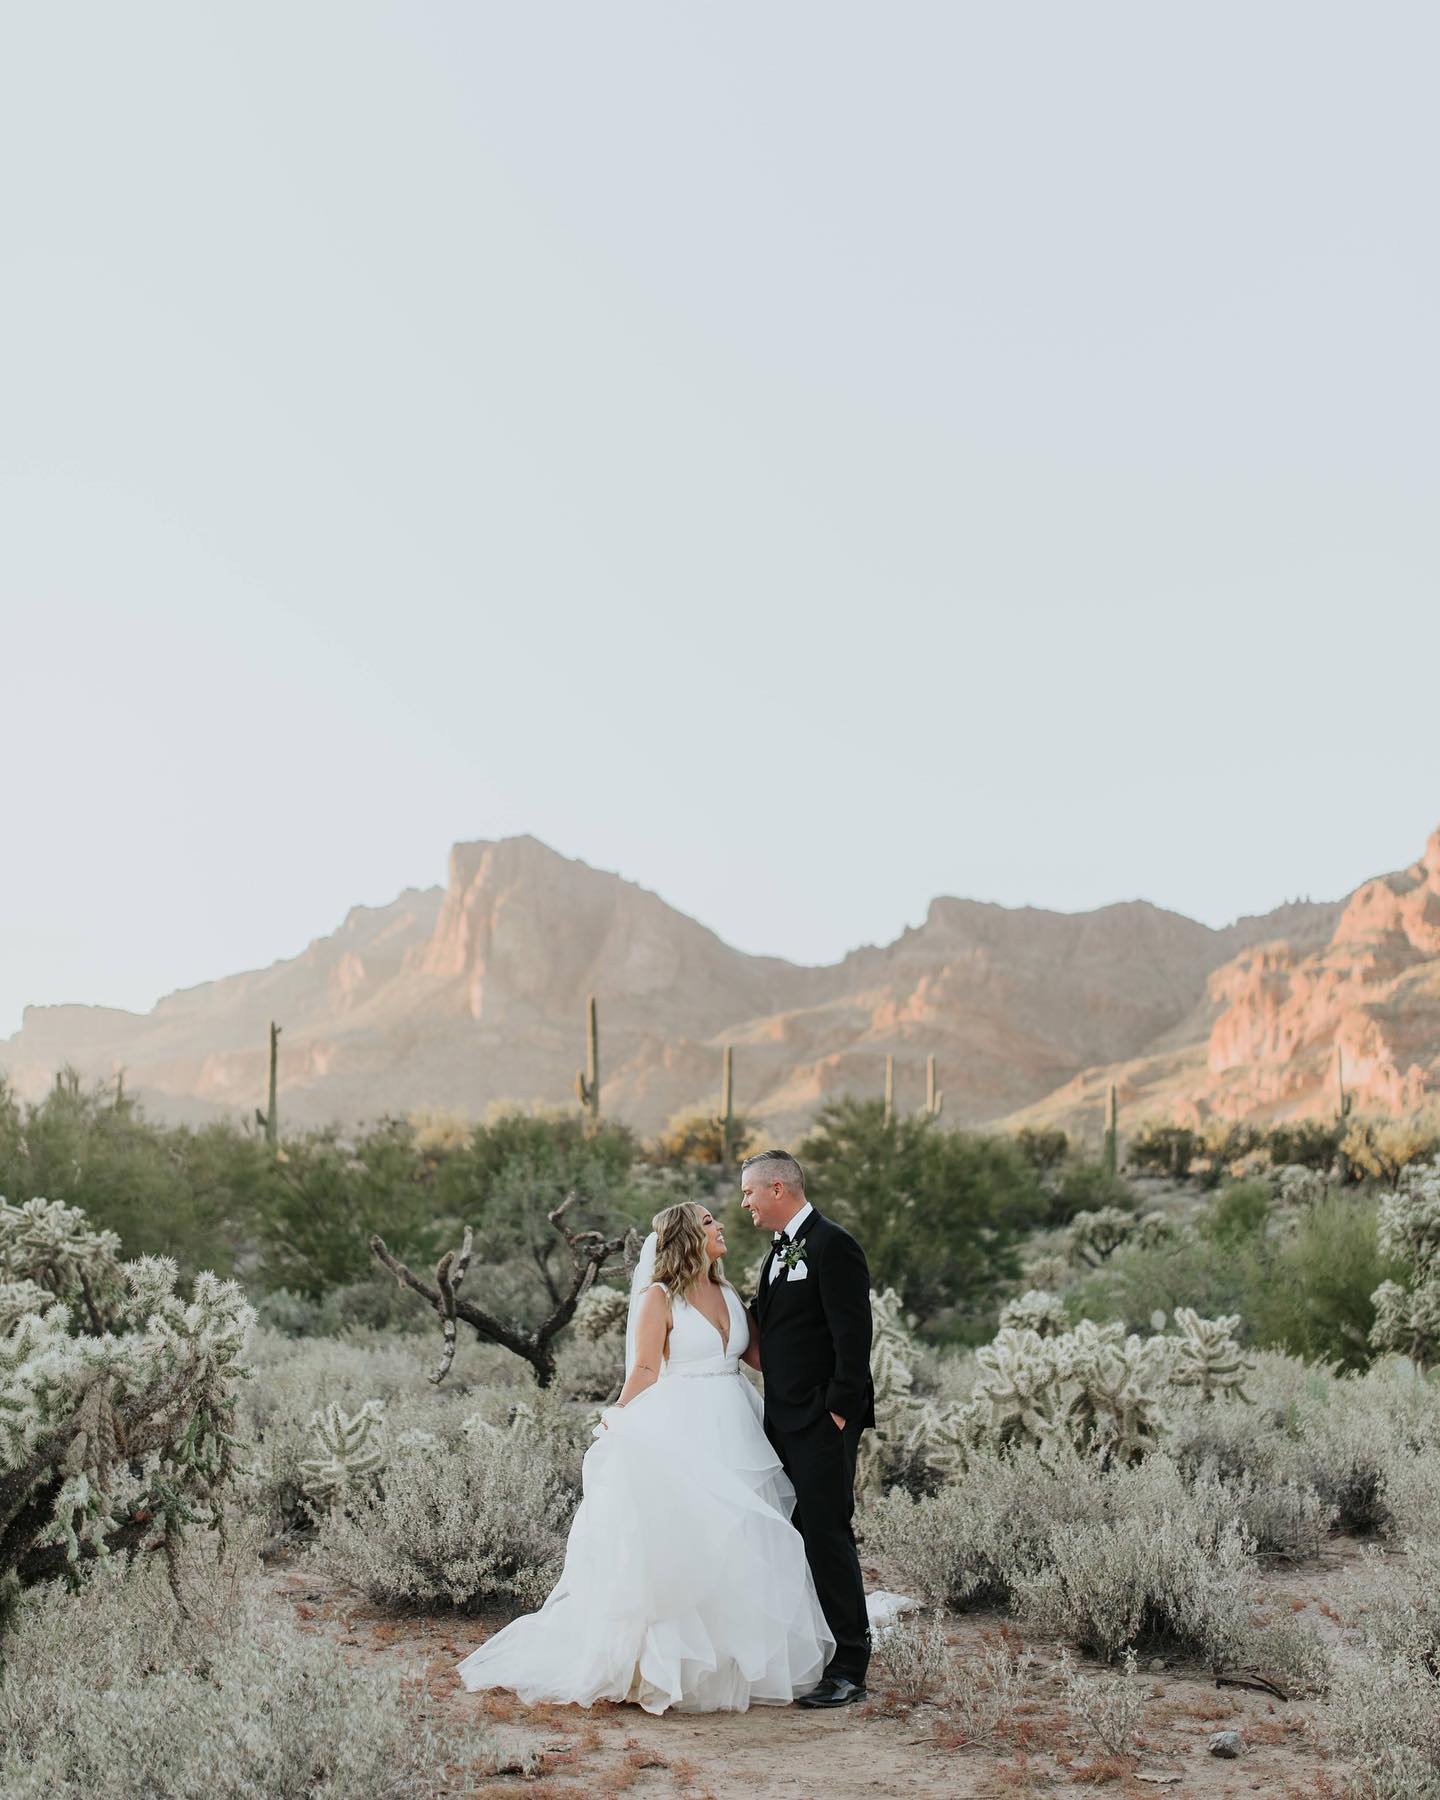 Falling in love all over again in the desert…always an option! 
🤍🤍🤍
Photo: @christieknightphotography 
Video: @chayse.carmichael 
Venue: @clothandflameweddings 
Floral: @thewildflowersaz 
Cake: @abakeshop 
Live Painter: @liveeventartistaz 
Cigar Roller: @fumarcigars 
Custom Signage: @thedetailsduo 
Beauty: @hairmotty & @valeriafuertebeauty 
Couple: @alissamariealsup & @jason_alsup